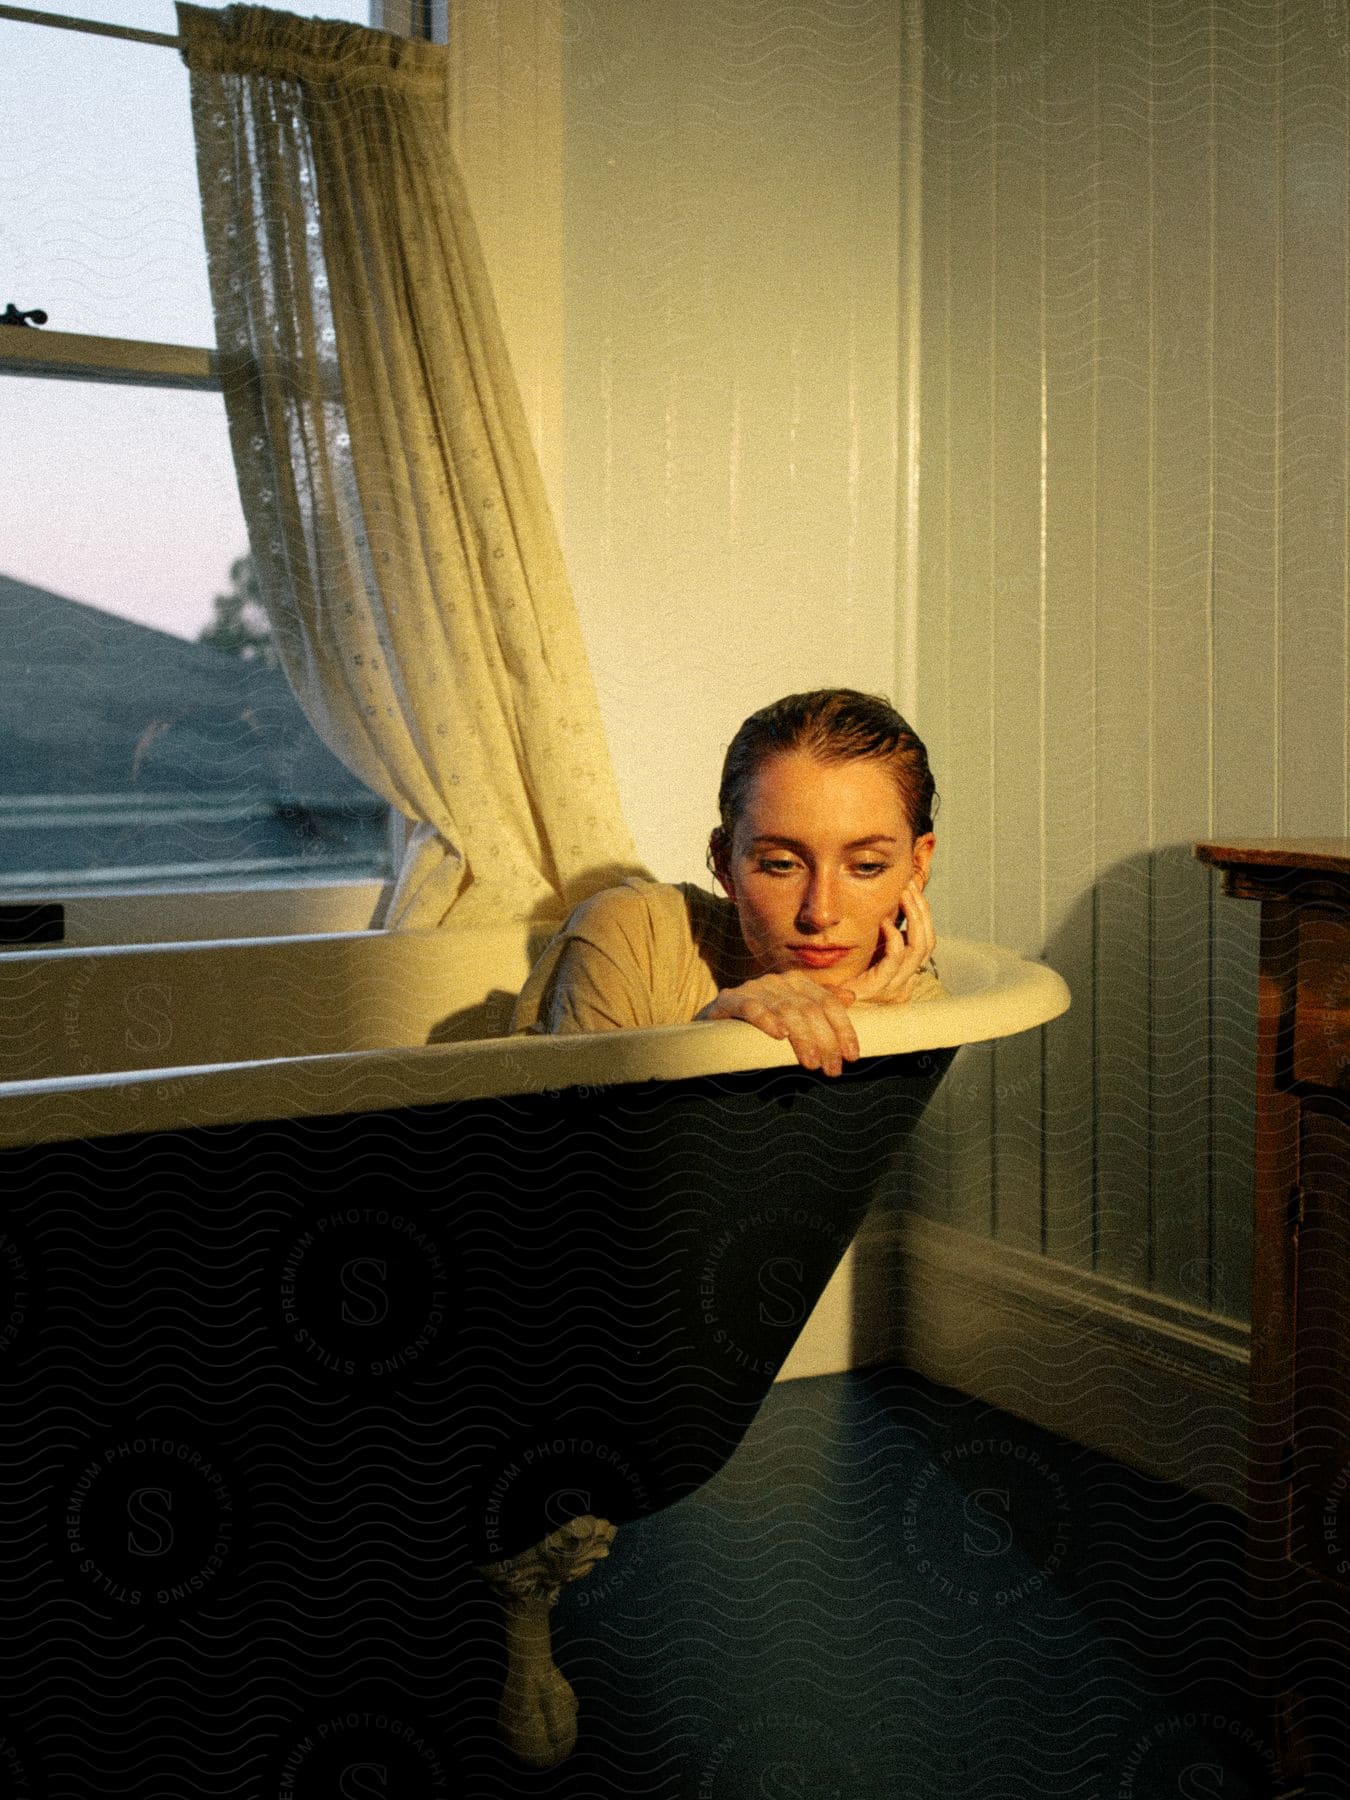 Woman in clothing modeling with wet hair inside a vintage bathtub.